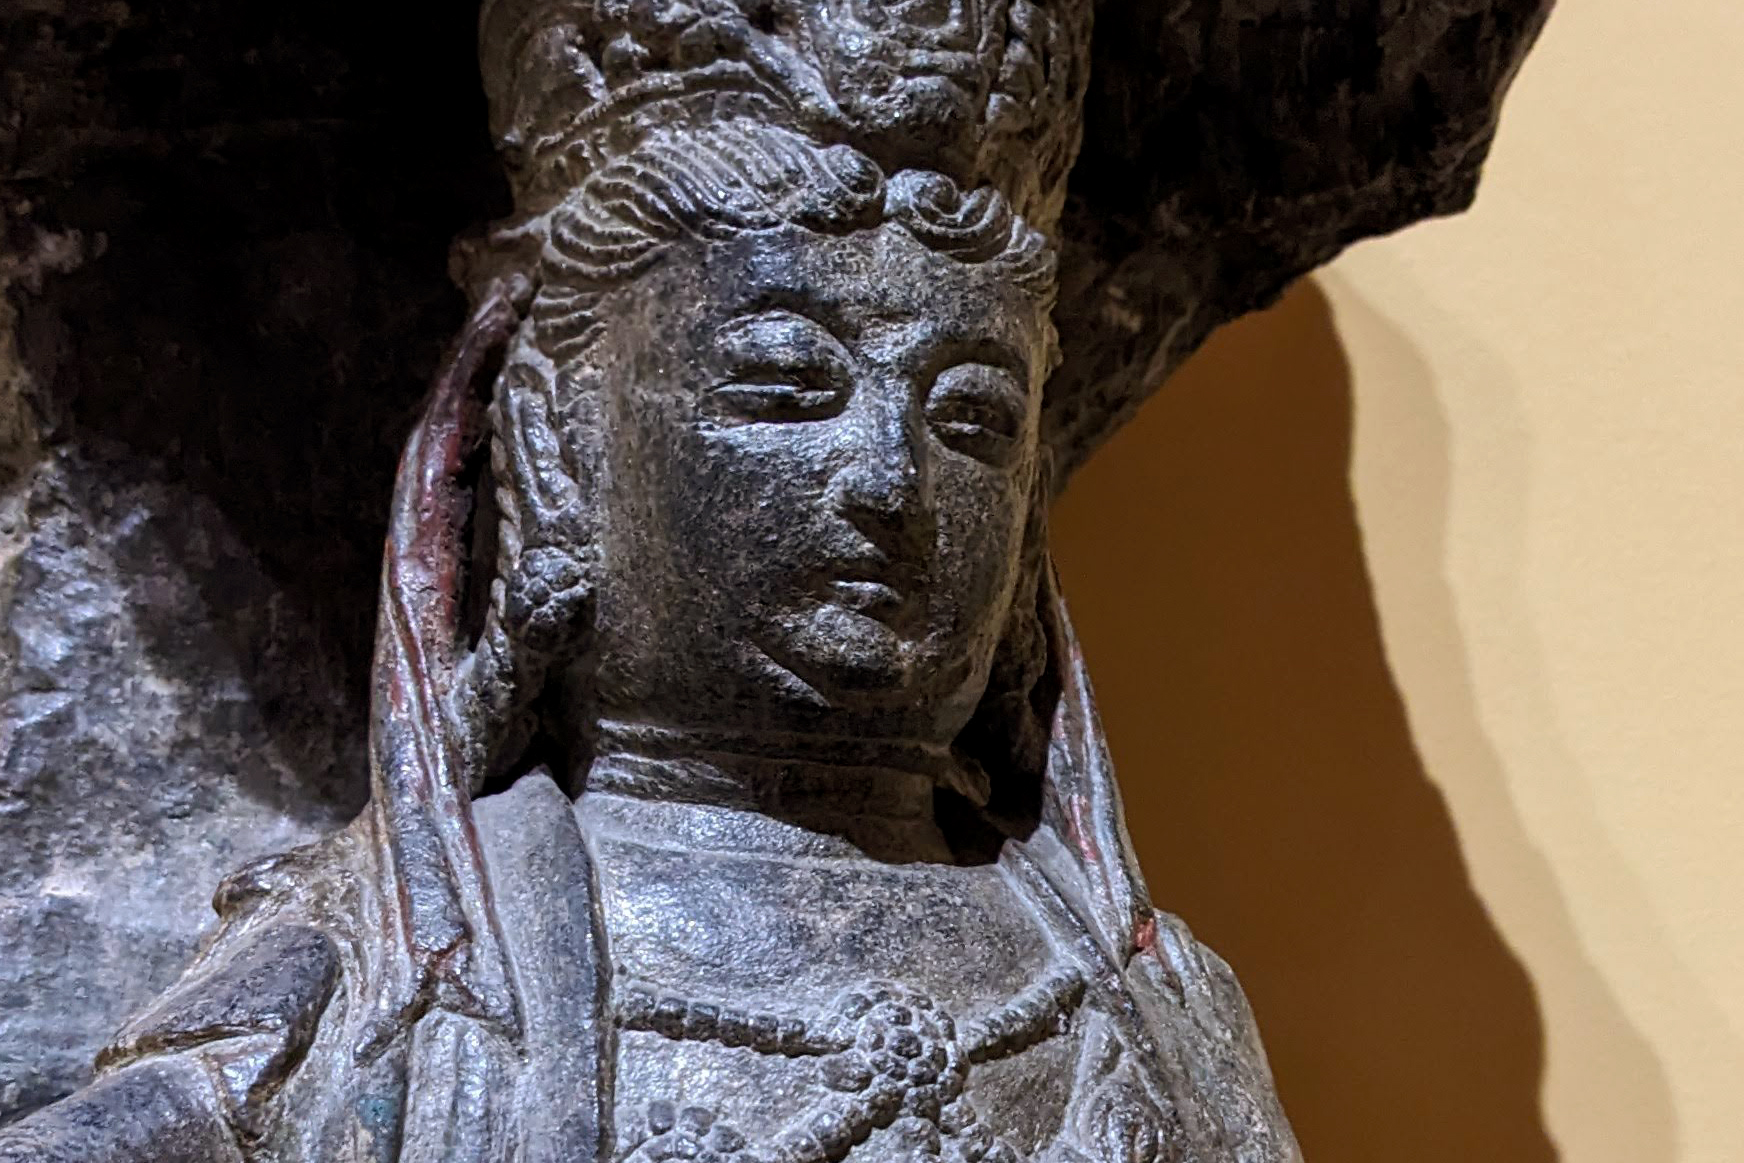 Detail of Guanyu seated in a grotto